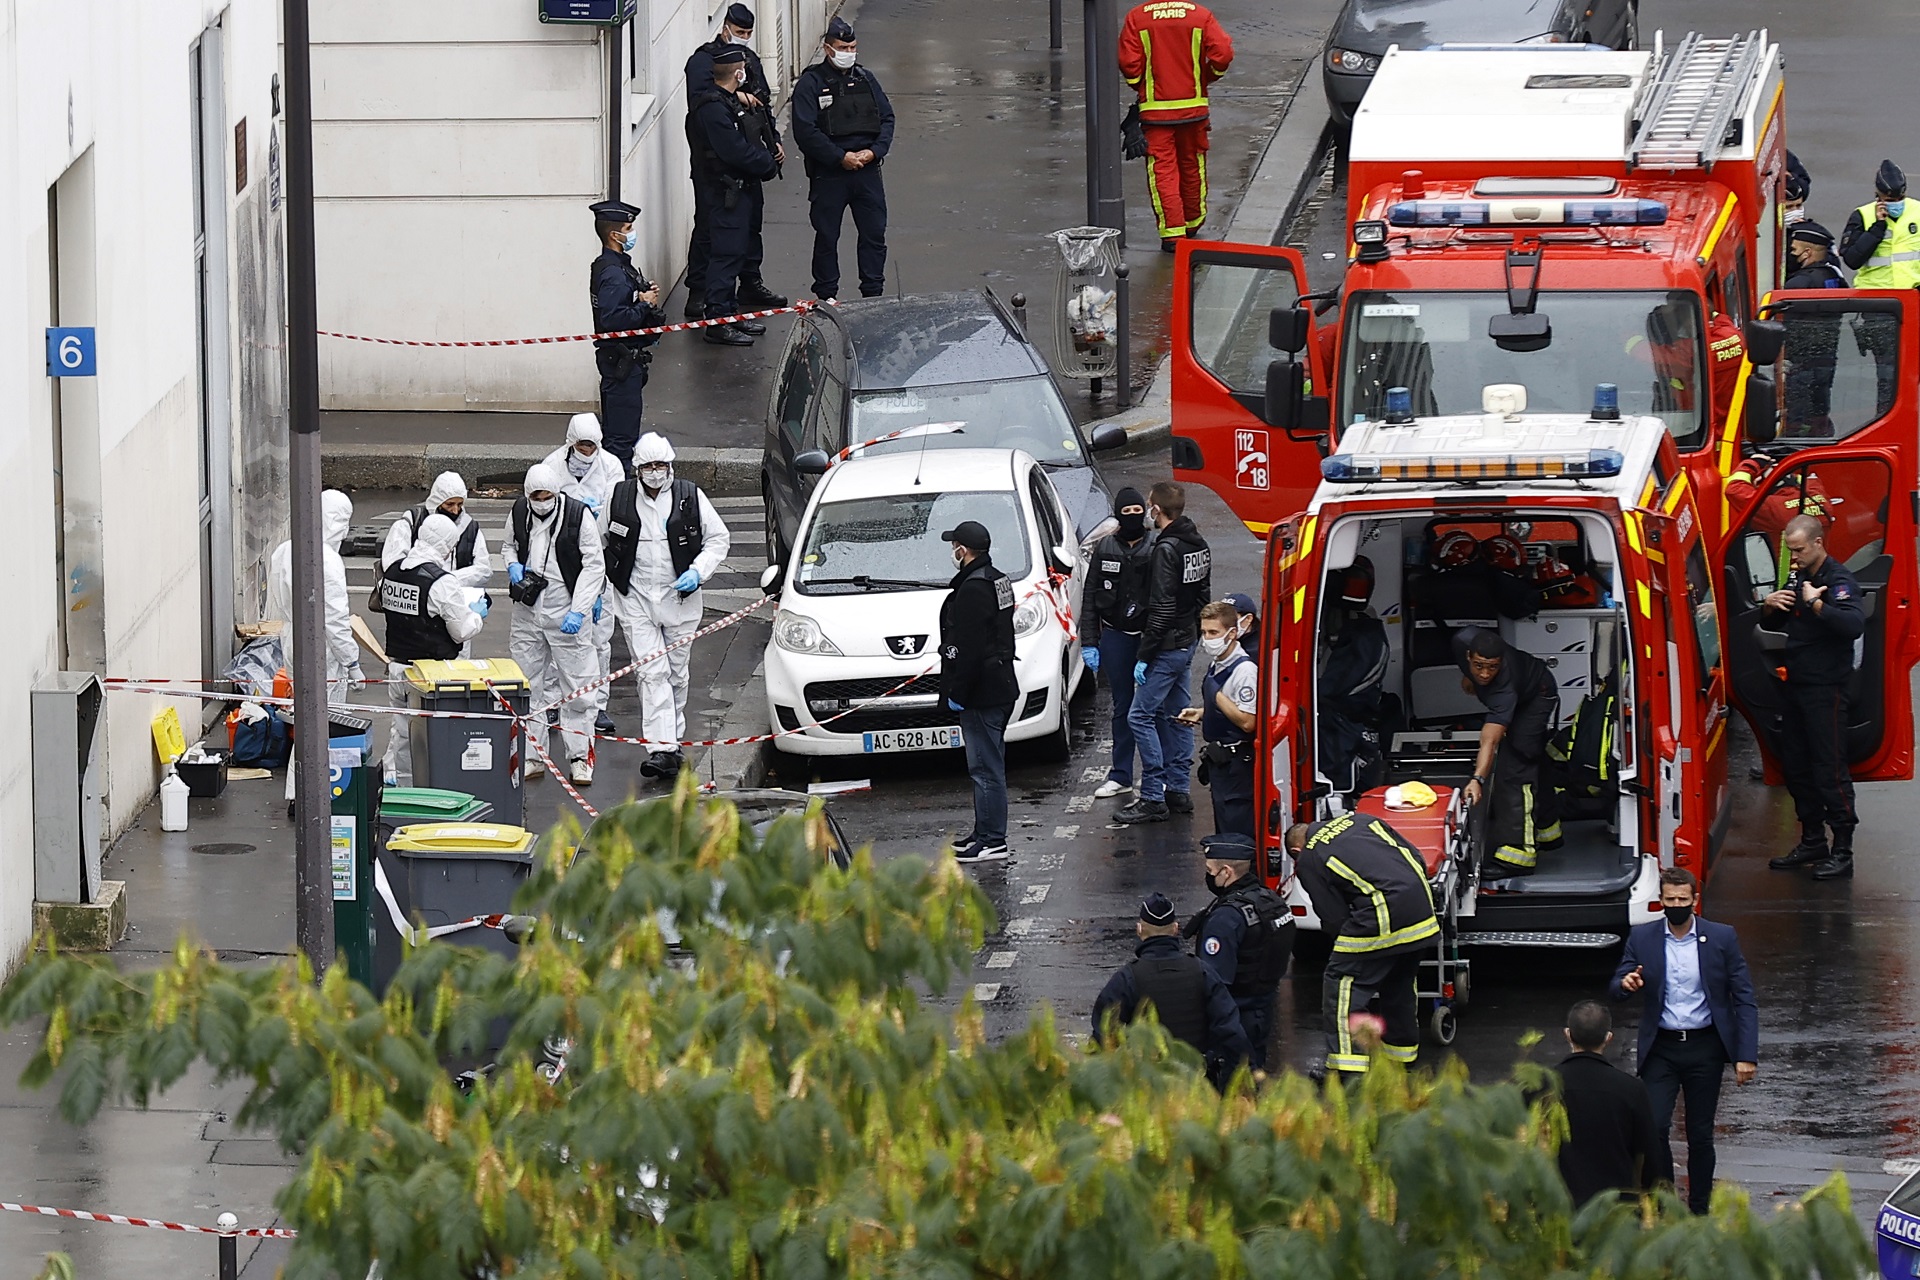 epa08696582 French police investigators work on the site of the knife attack near the former Charlie Hebdo offices, in Paris, France, 25 September 2020, after two people have been wounded. According to recent reports, two assailants have been arrested in the Bastille area.  EPA/IAN LANGSDON